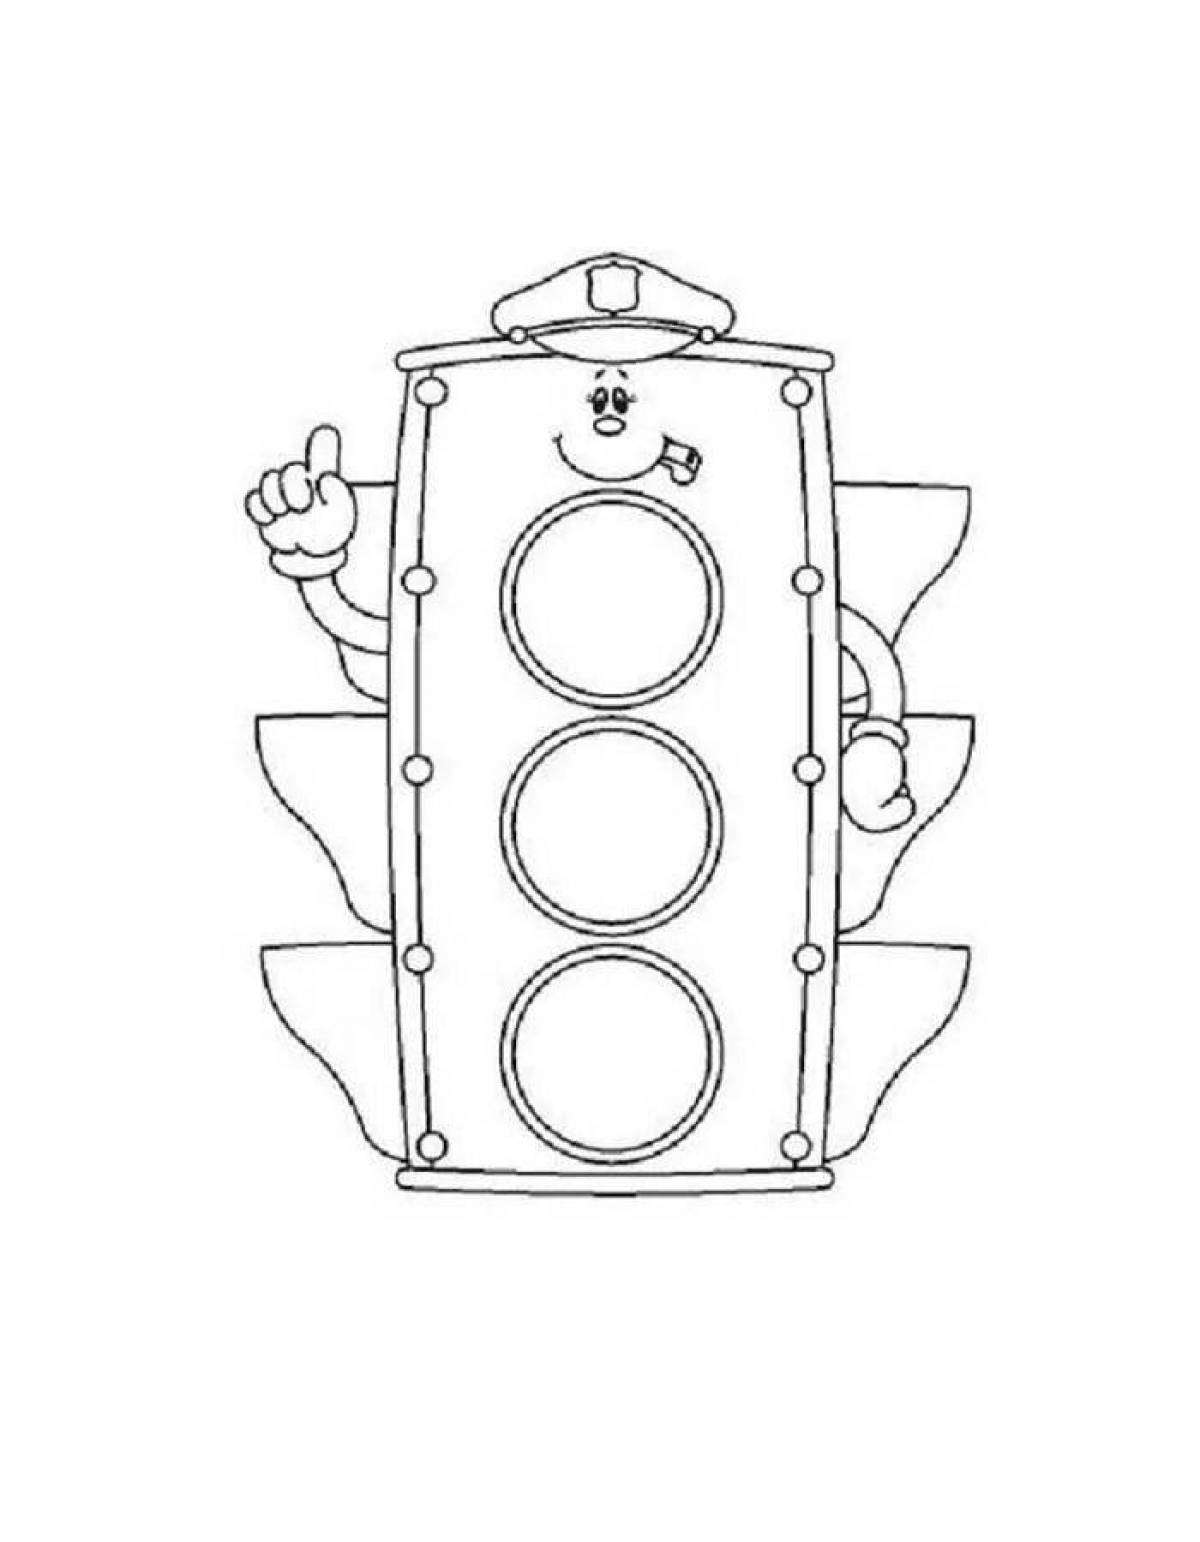 Majestic traffic light coloring page